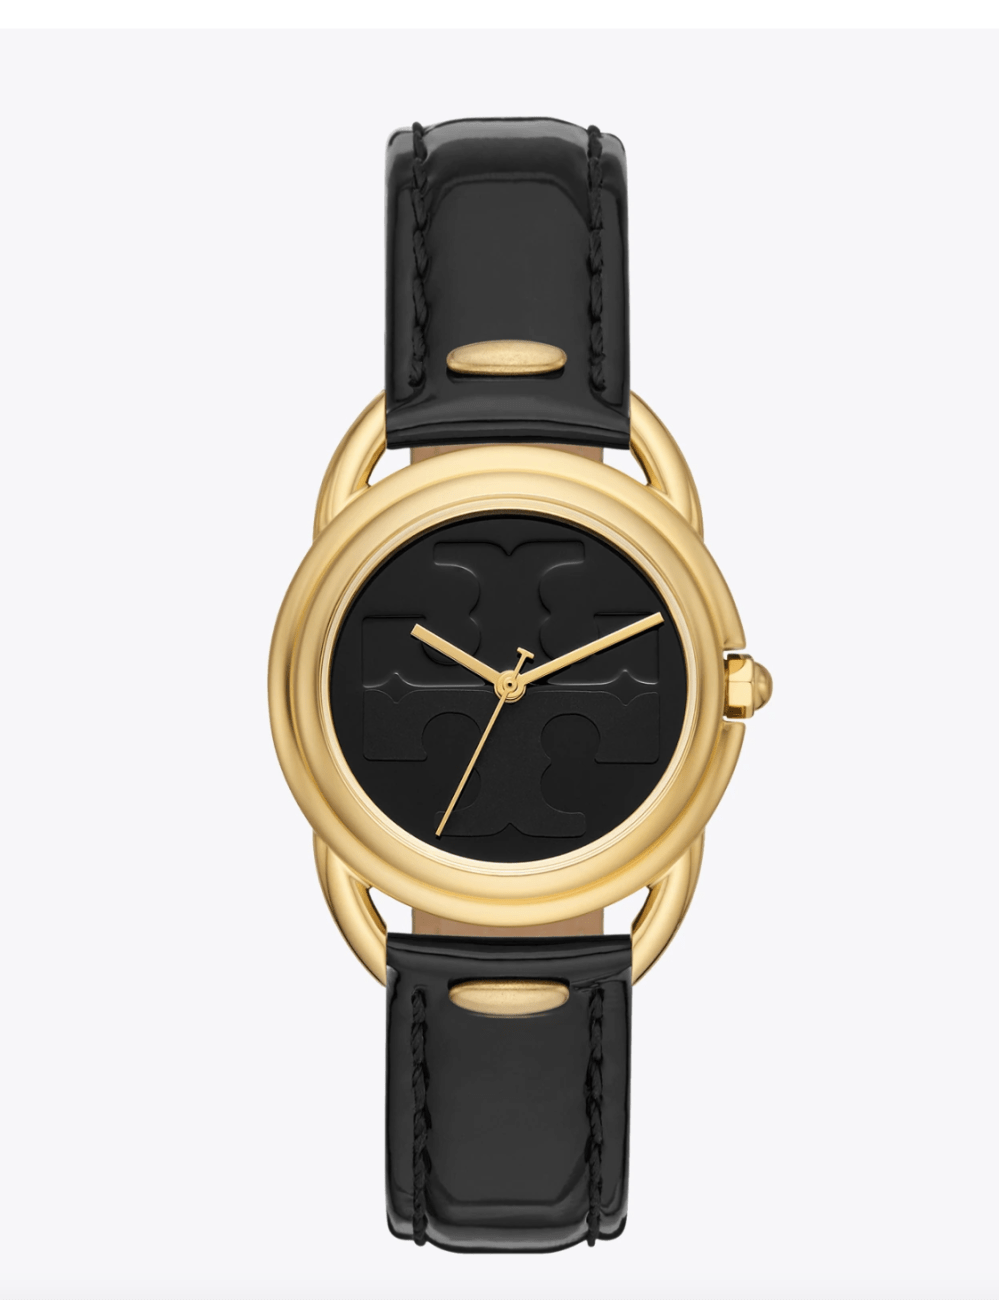 Miller Watch, Black Patent Leather:Gold-Tone Stainless Steel